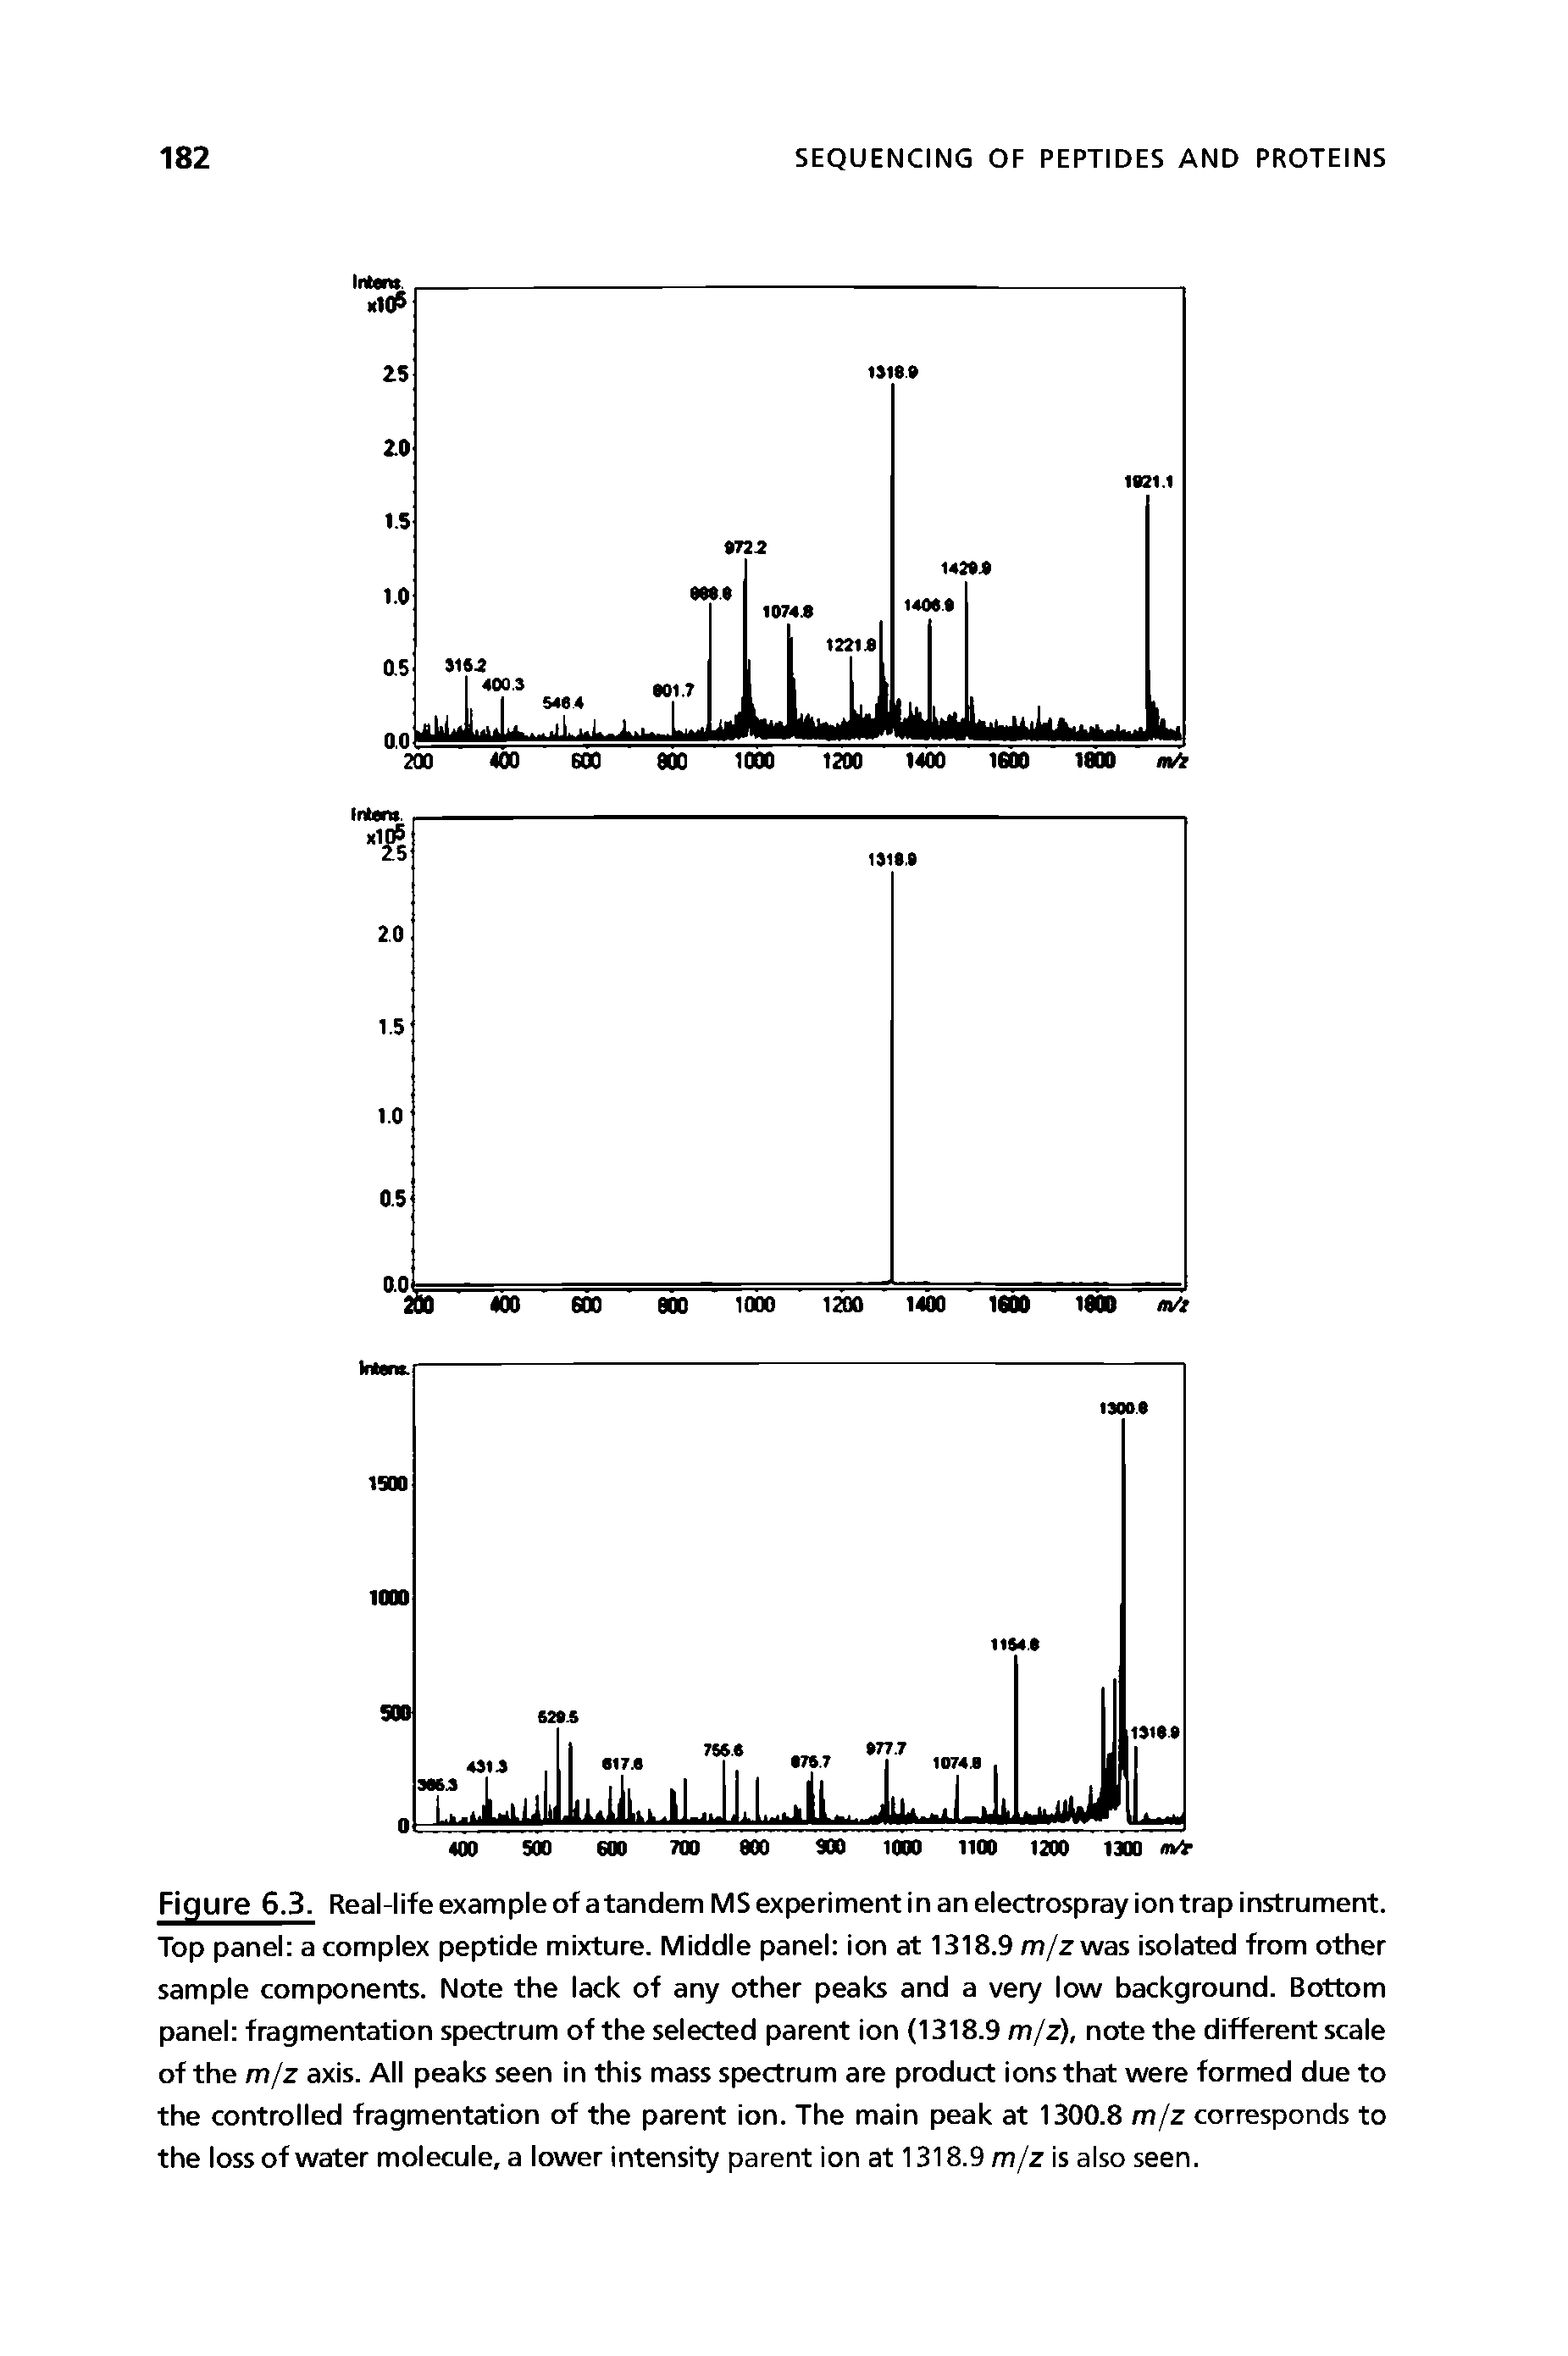 Figure 6.3. Real-life example of a tandem MS experiment in an electrospray ion trap instrument. Top panel a complex peptide mixture. Middle panel ion at 1318.9 m/z was isolated from other sample components. Note the lack of any other peaks and a very low background. Bottom panel fragmentation spectrum of the selected parent ion (1318.9 m/z), note the different scale of the m/z axis. All peaks seen in this mass spectrum are product ions that were formed due to the controlled fragmentation of the parent ion. The main peak at 1300.8 m/z corresponds to the loss of water molecule, a lower intensity parent ion at 1318.9 m/z is also seen.